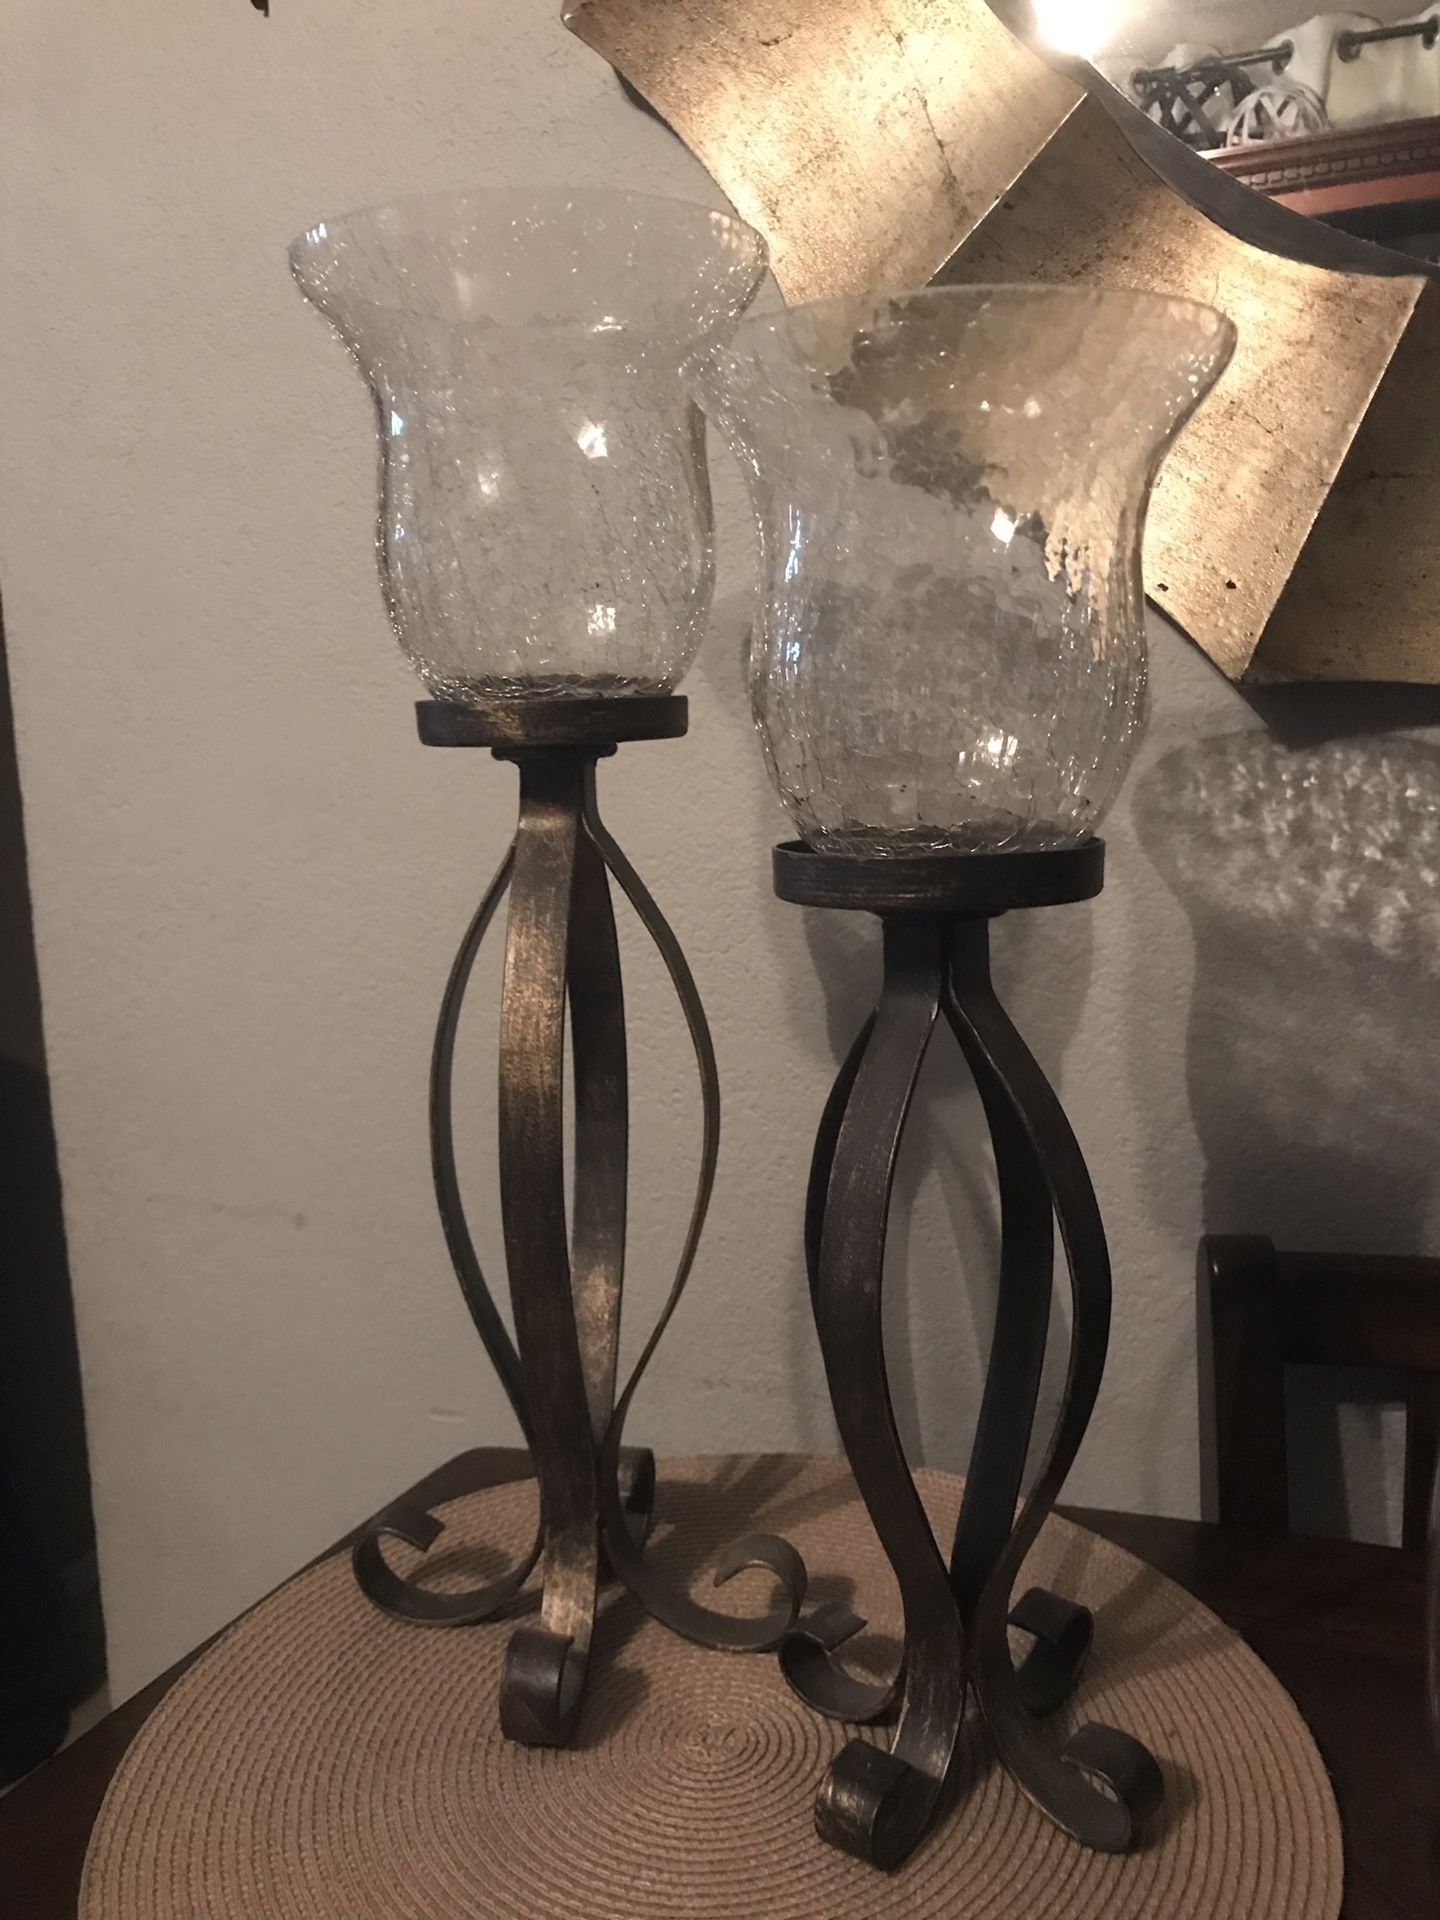 2 CANDLE HOLDERS 🕯🕯